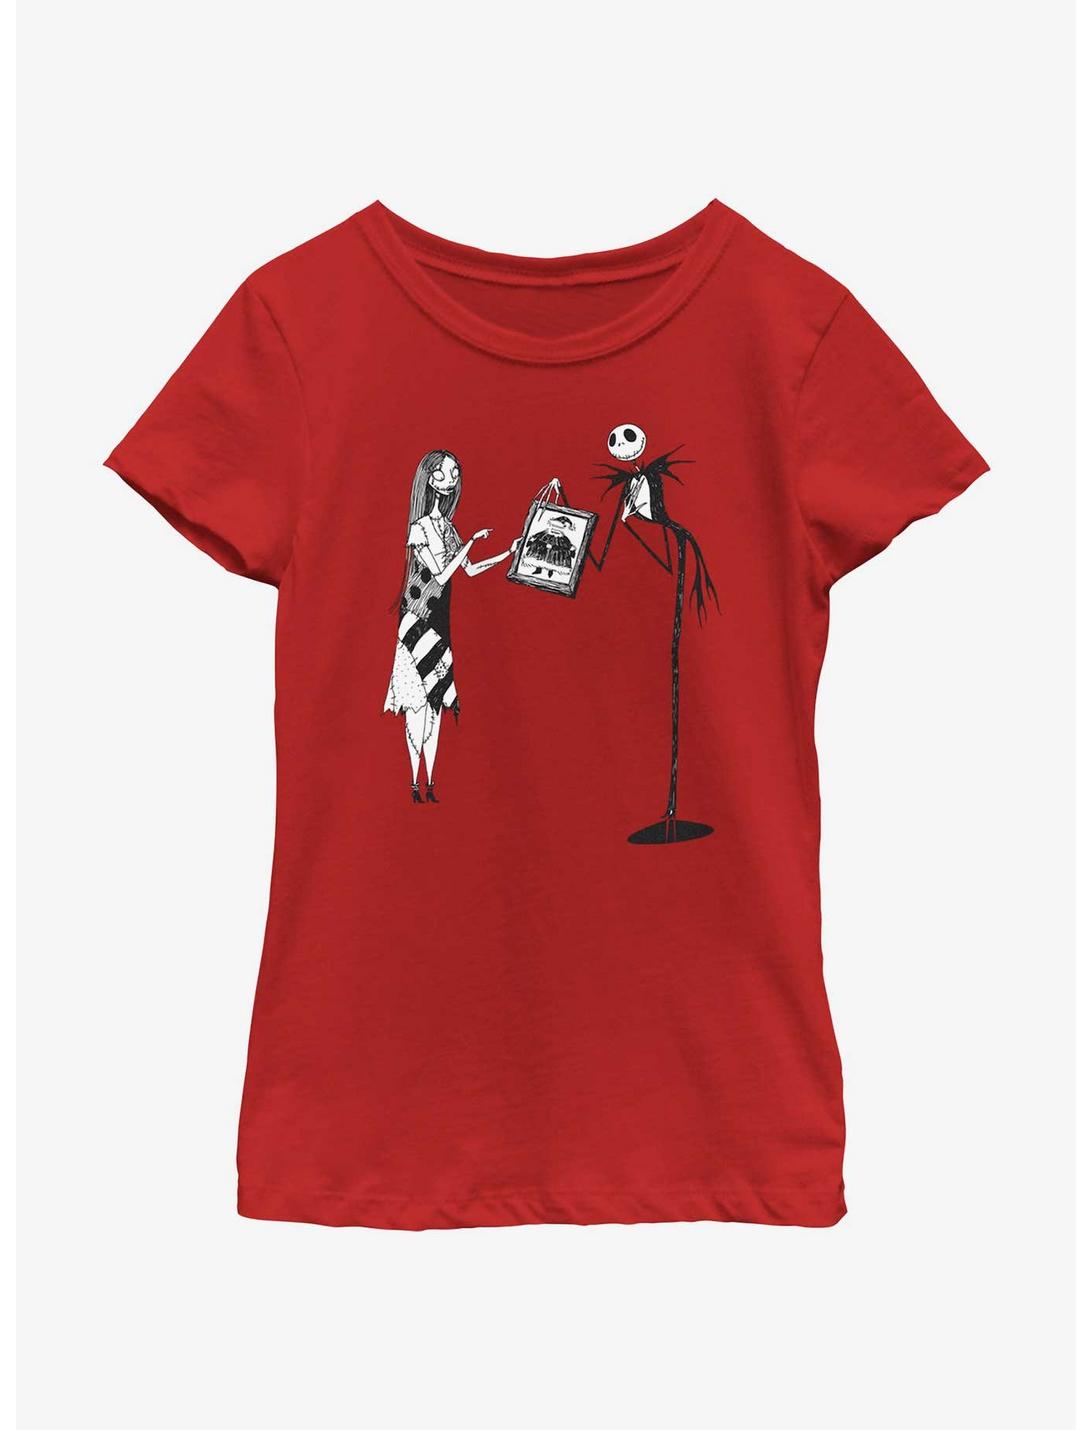 Disney Nightmare Before Christmas Sally & Jack Sandy Claws Youth Girls T-Shirt, RED, hi-res